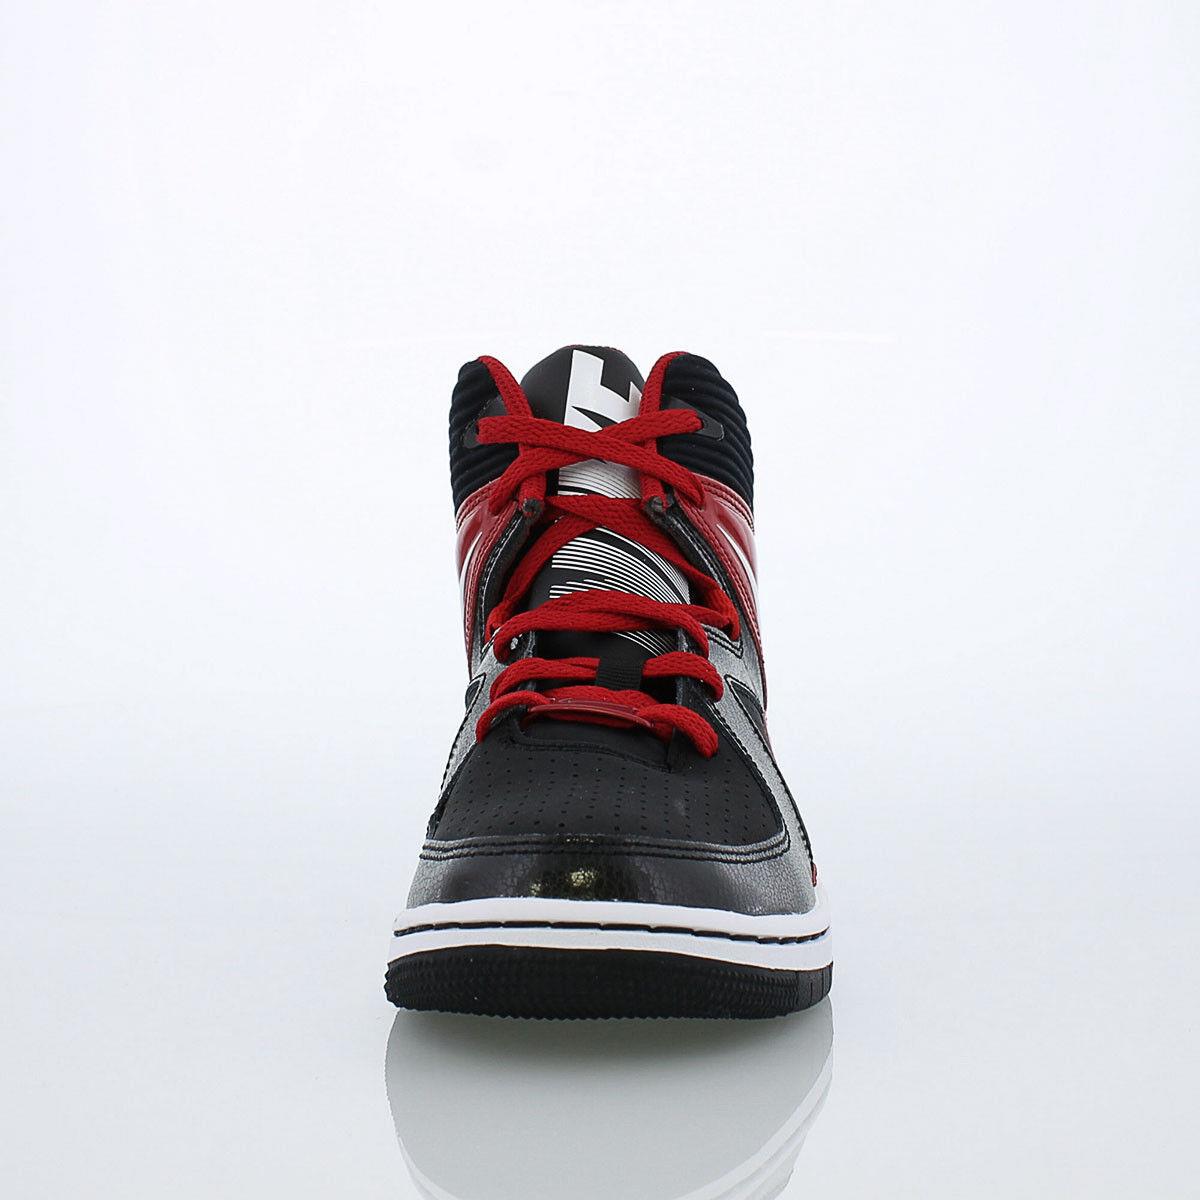 Nike shoes  - Black/Red 1